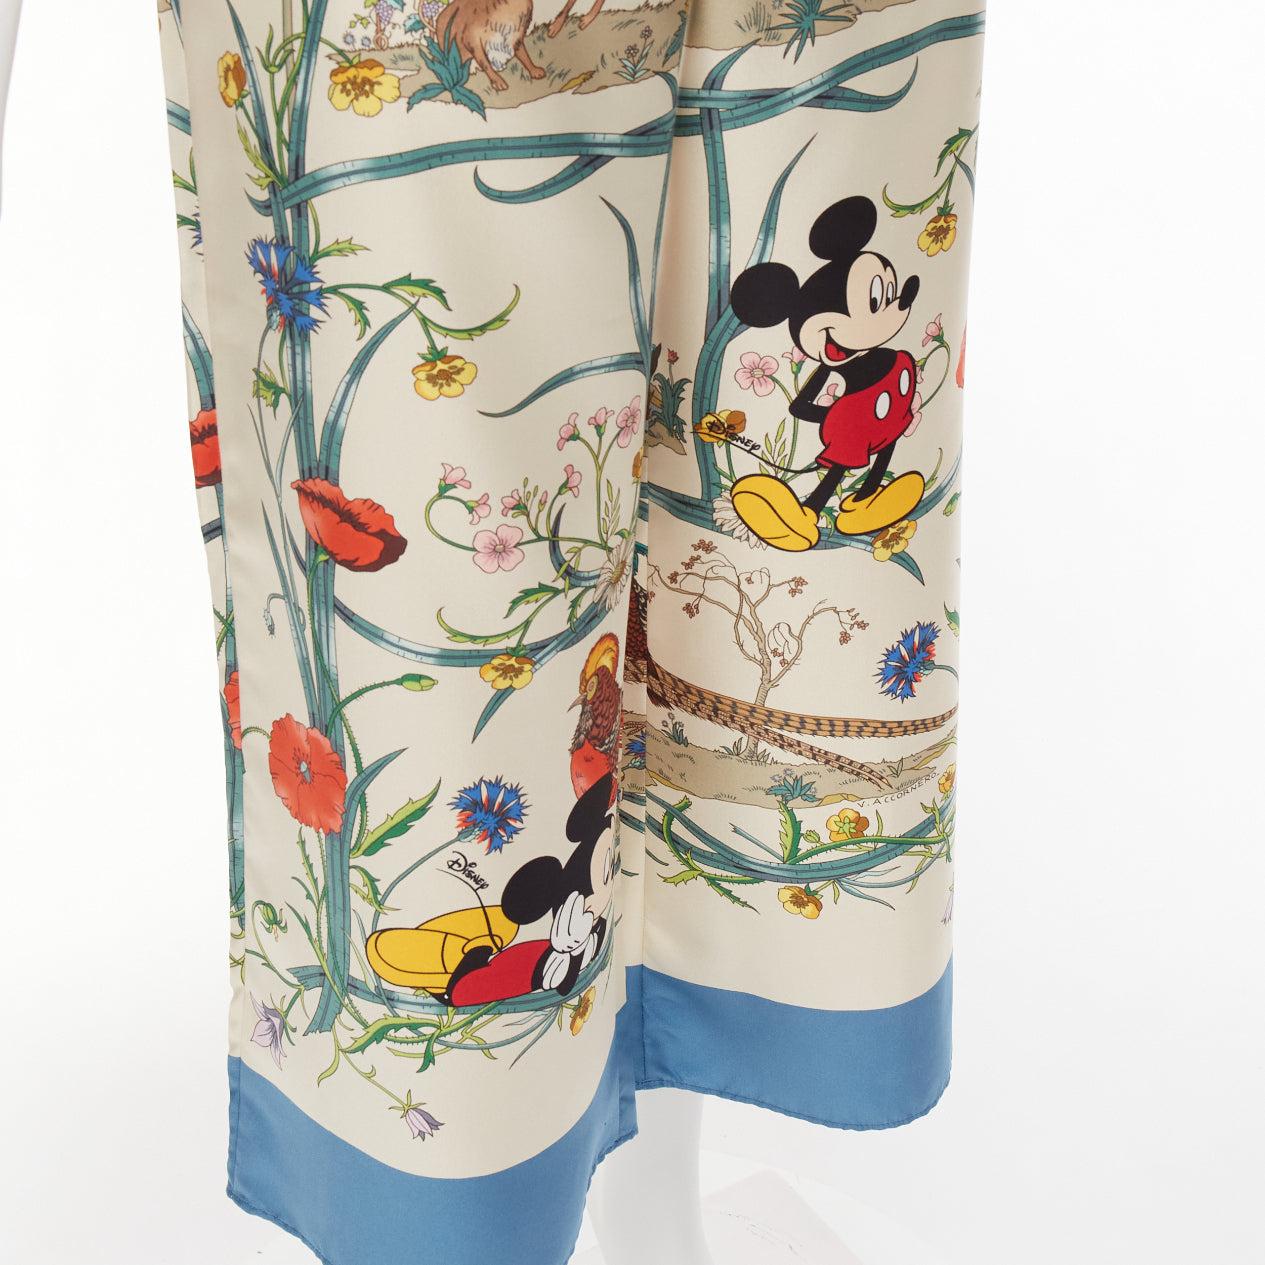 GUCCI Disney Mickey Mouse 100% silk floral print wide pants IT36 XXS
Reference: LNKO/A02327
Brand: Gucci
Designer: Alessandro Michele
Collection: Disney
Material: Silk
Color: Blue, Cream
Pattern: Floral
Closure: Zip Fly
Estimated Retail Price: USD